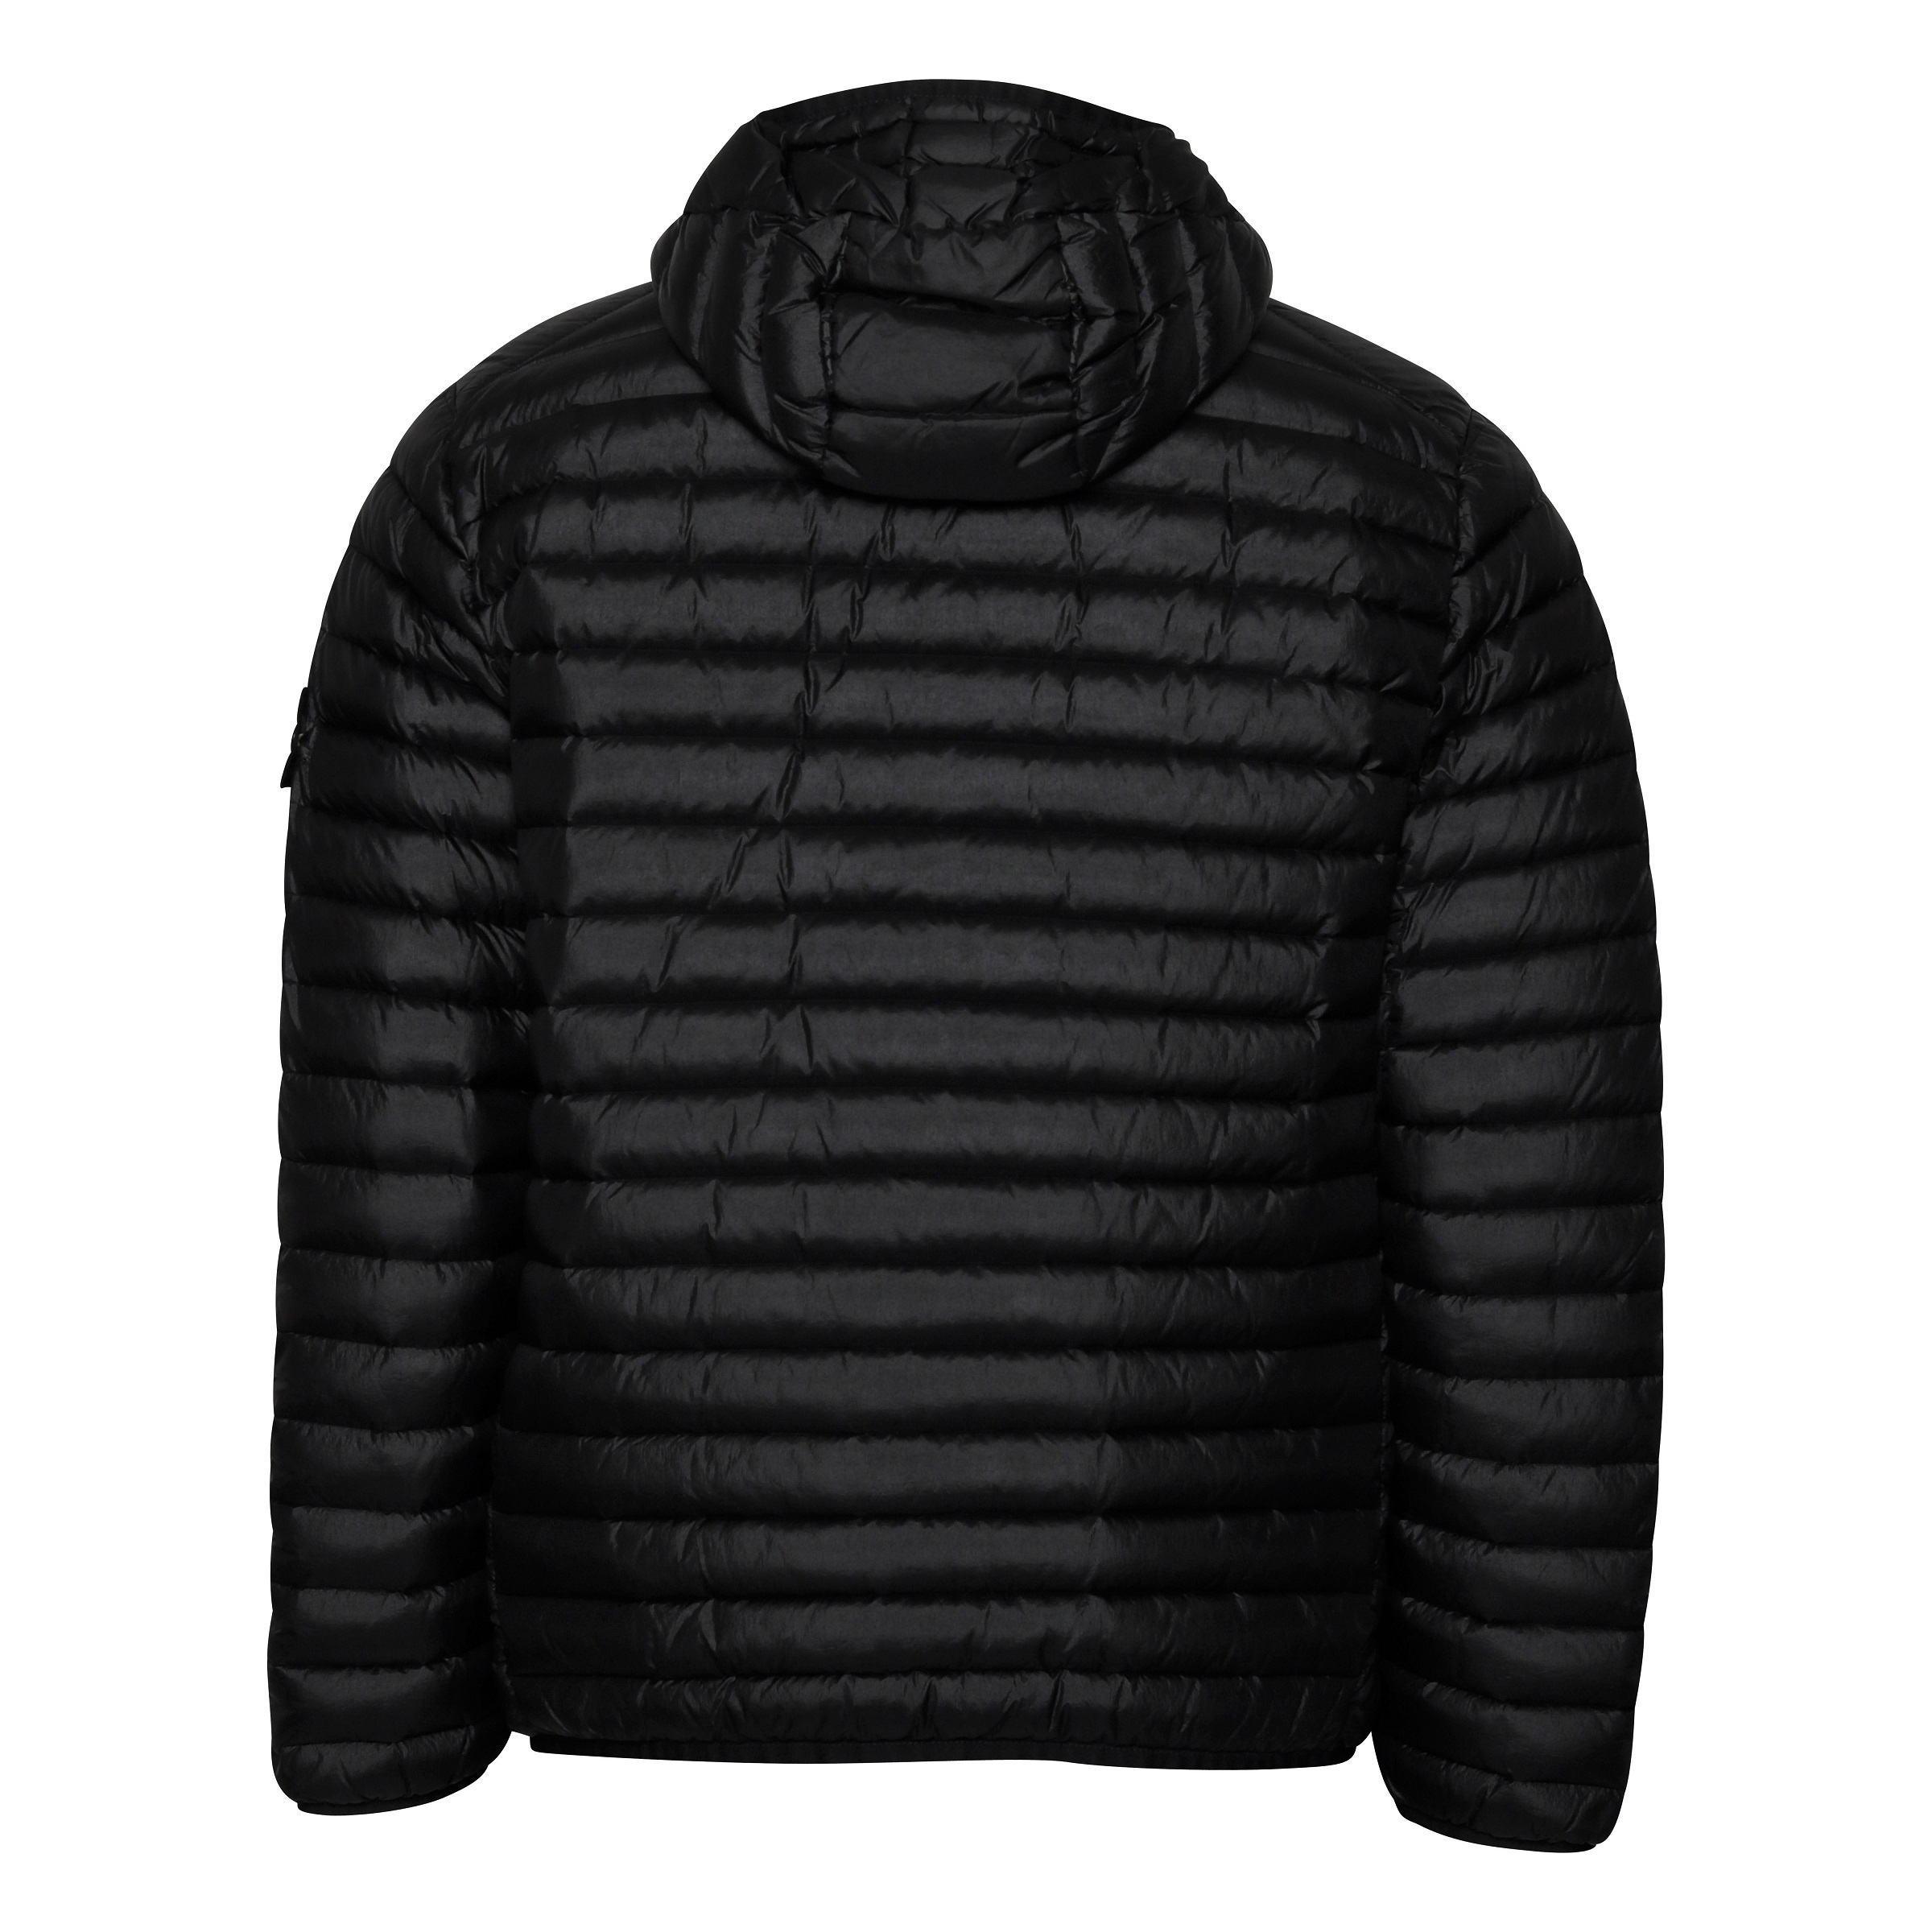 Stone Island Hooded Real Down Jacket in Black 3XL